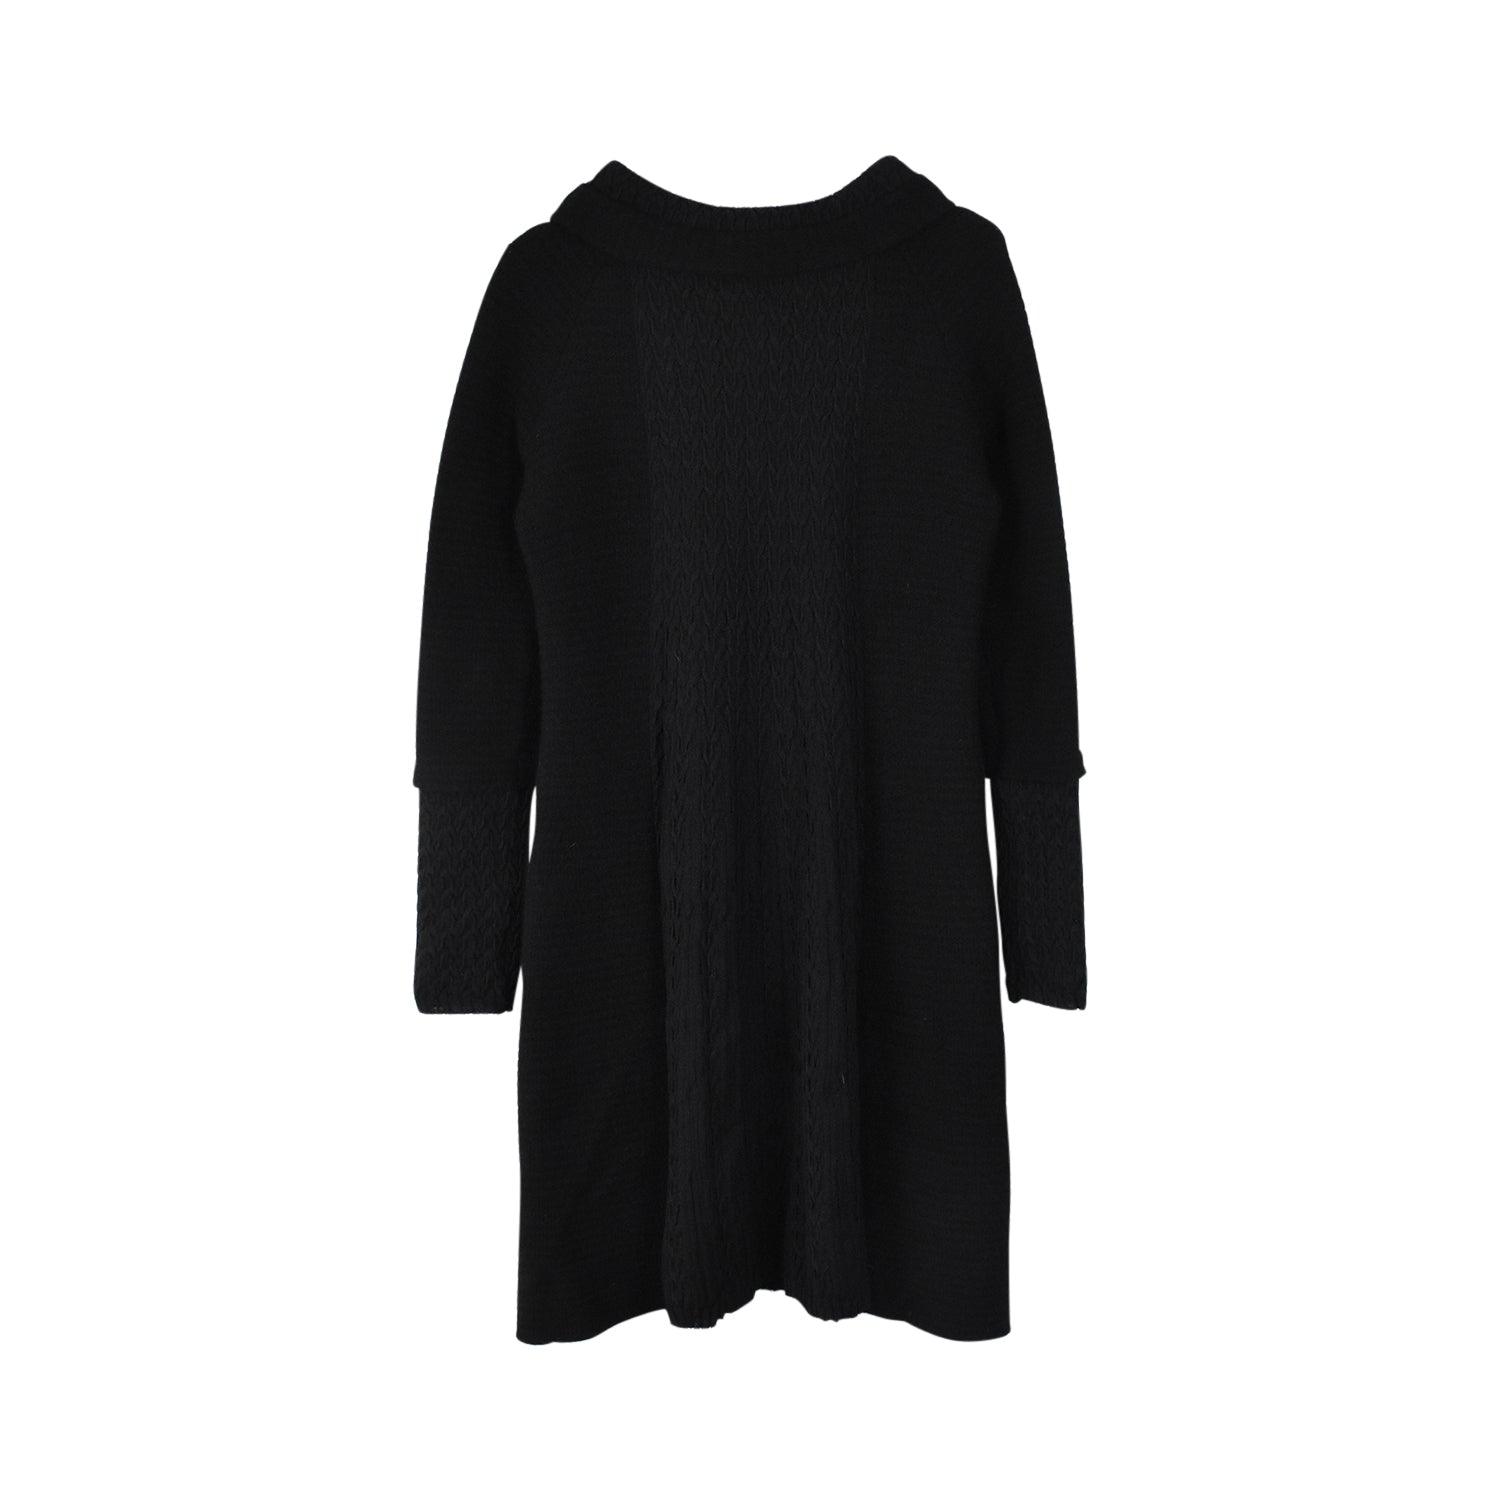 Chanel Dress - Women's 38 - Fashionably Yours